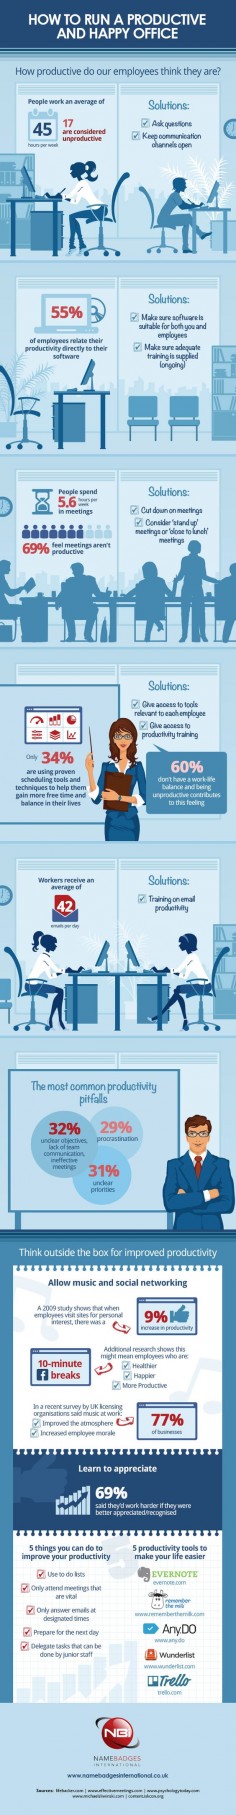 How to Run a Productive Office (Infographic)